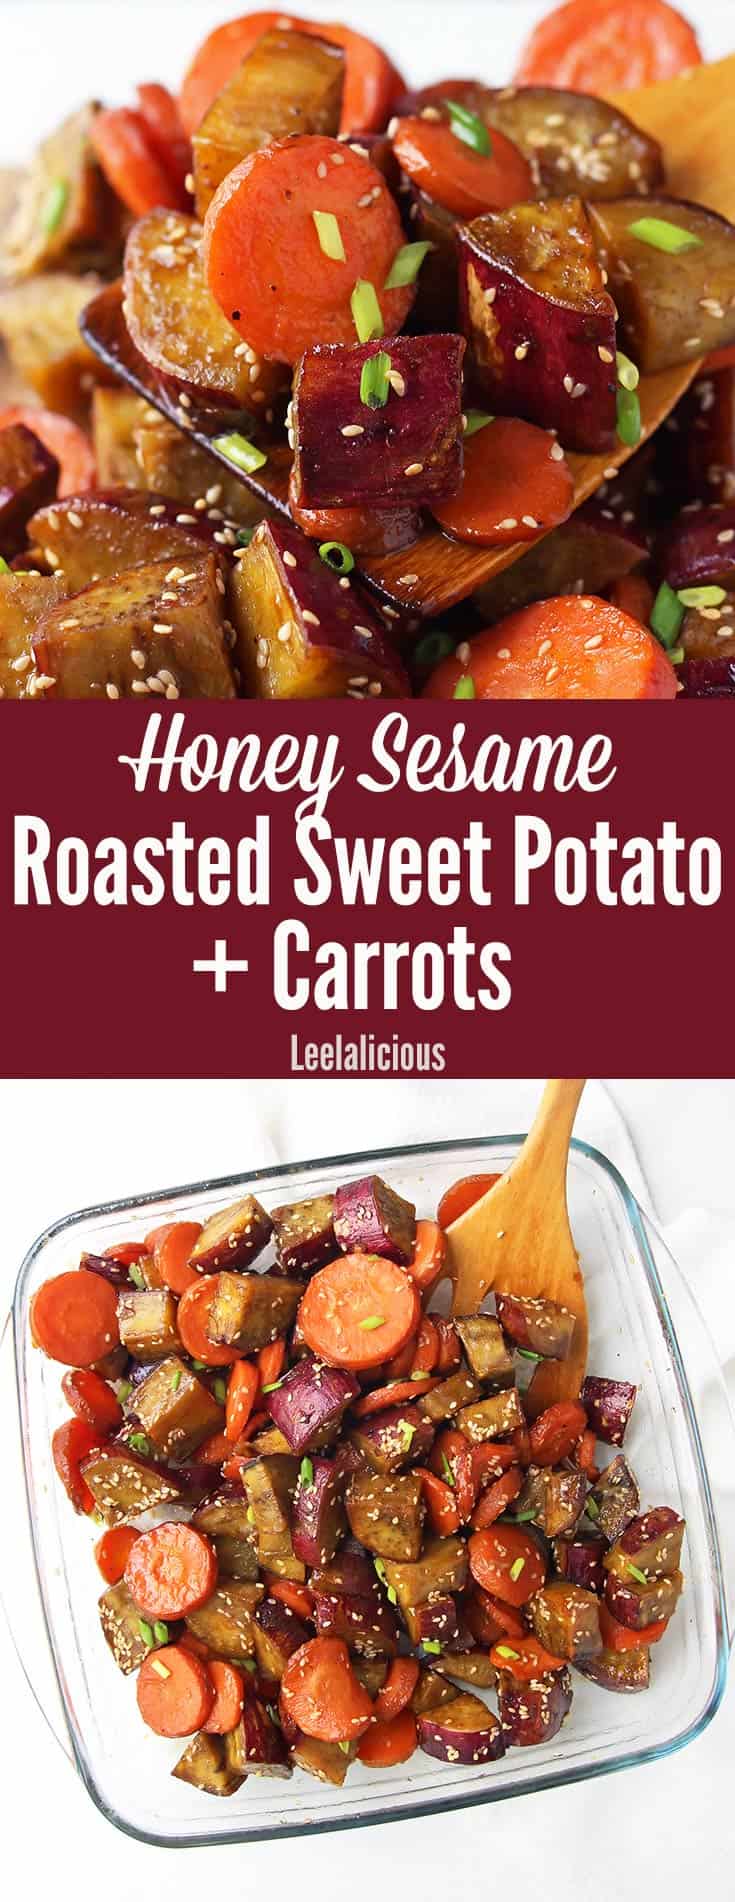 Oven roasted sweet potatoes and carrots with a honey sesame glaze make a delicious healthy vegetable side dish for the holidays or any time of year.